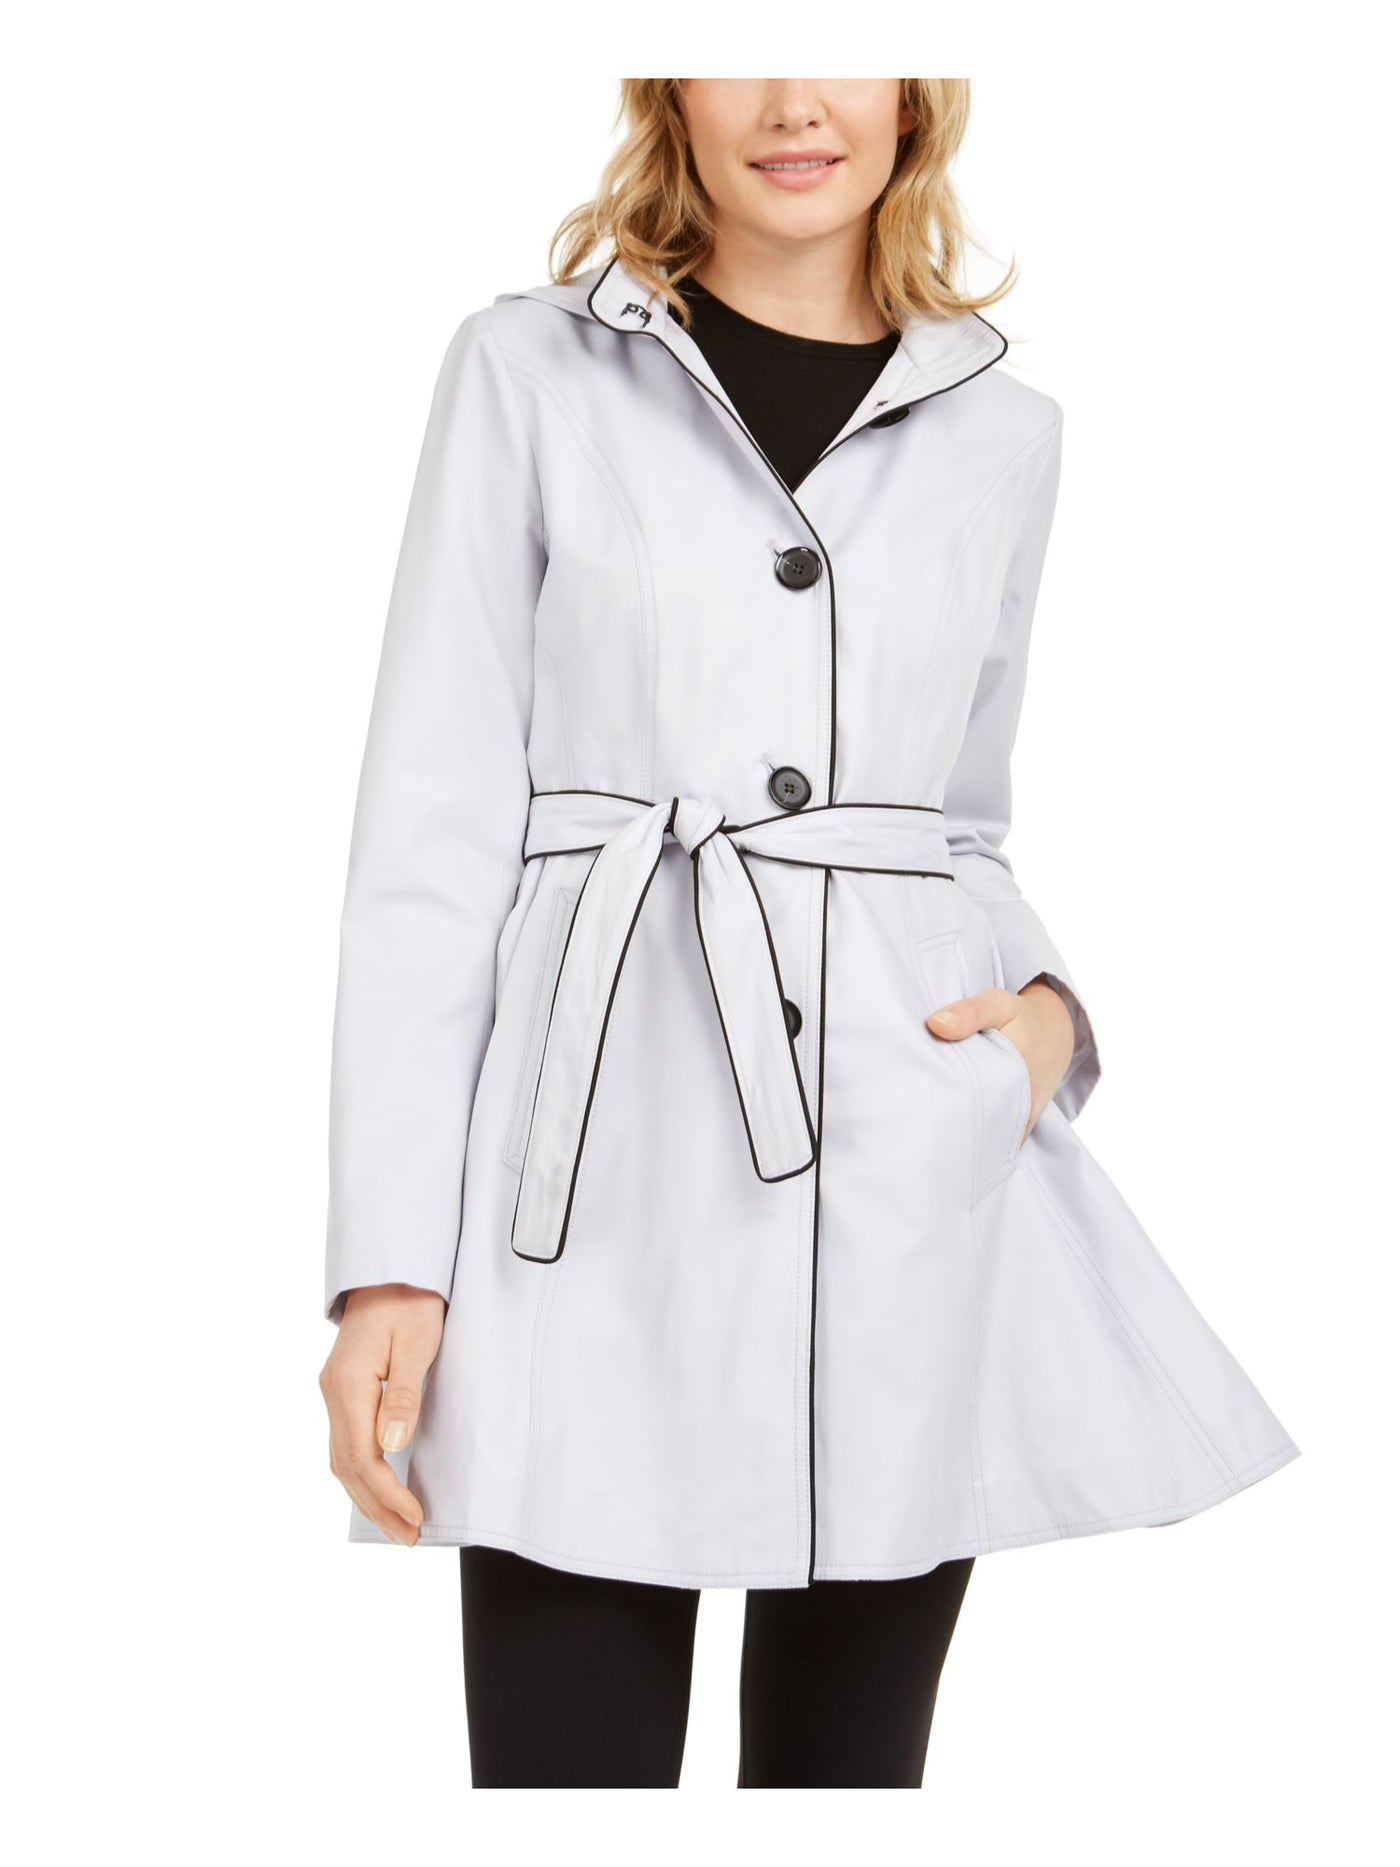 LAUNDRY Womens Belted Pocketed Hooded Raincoat